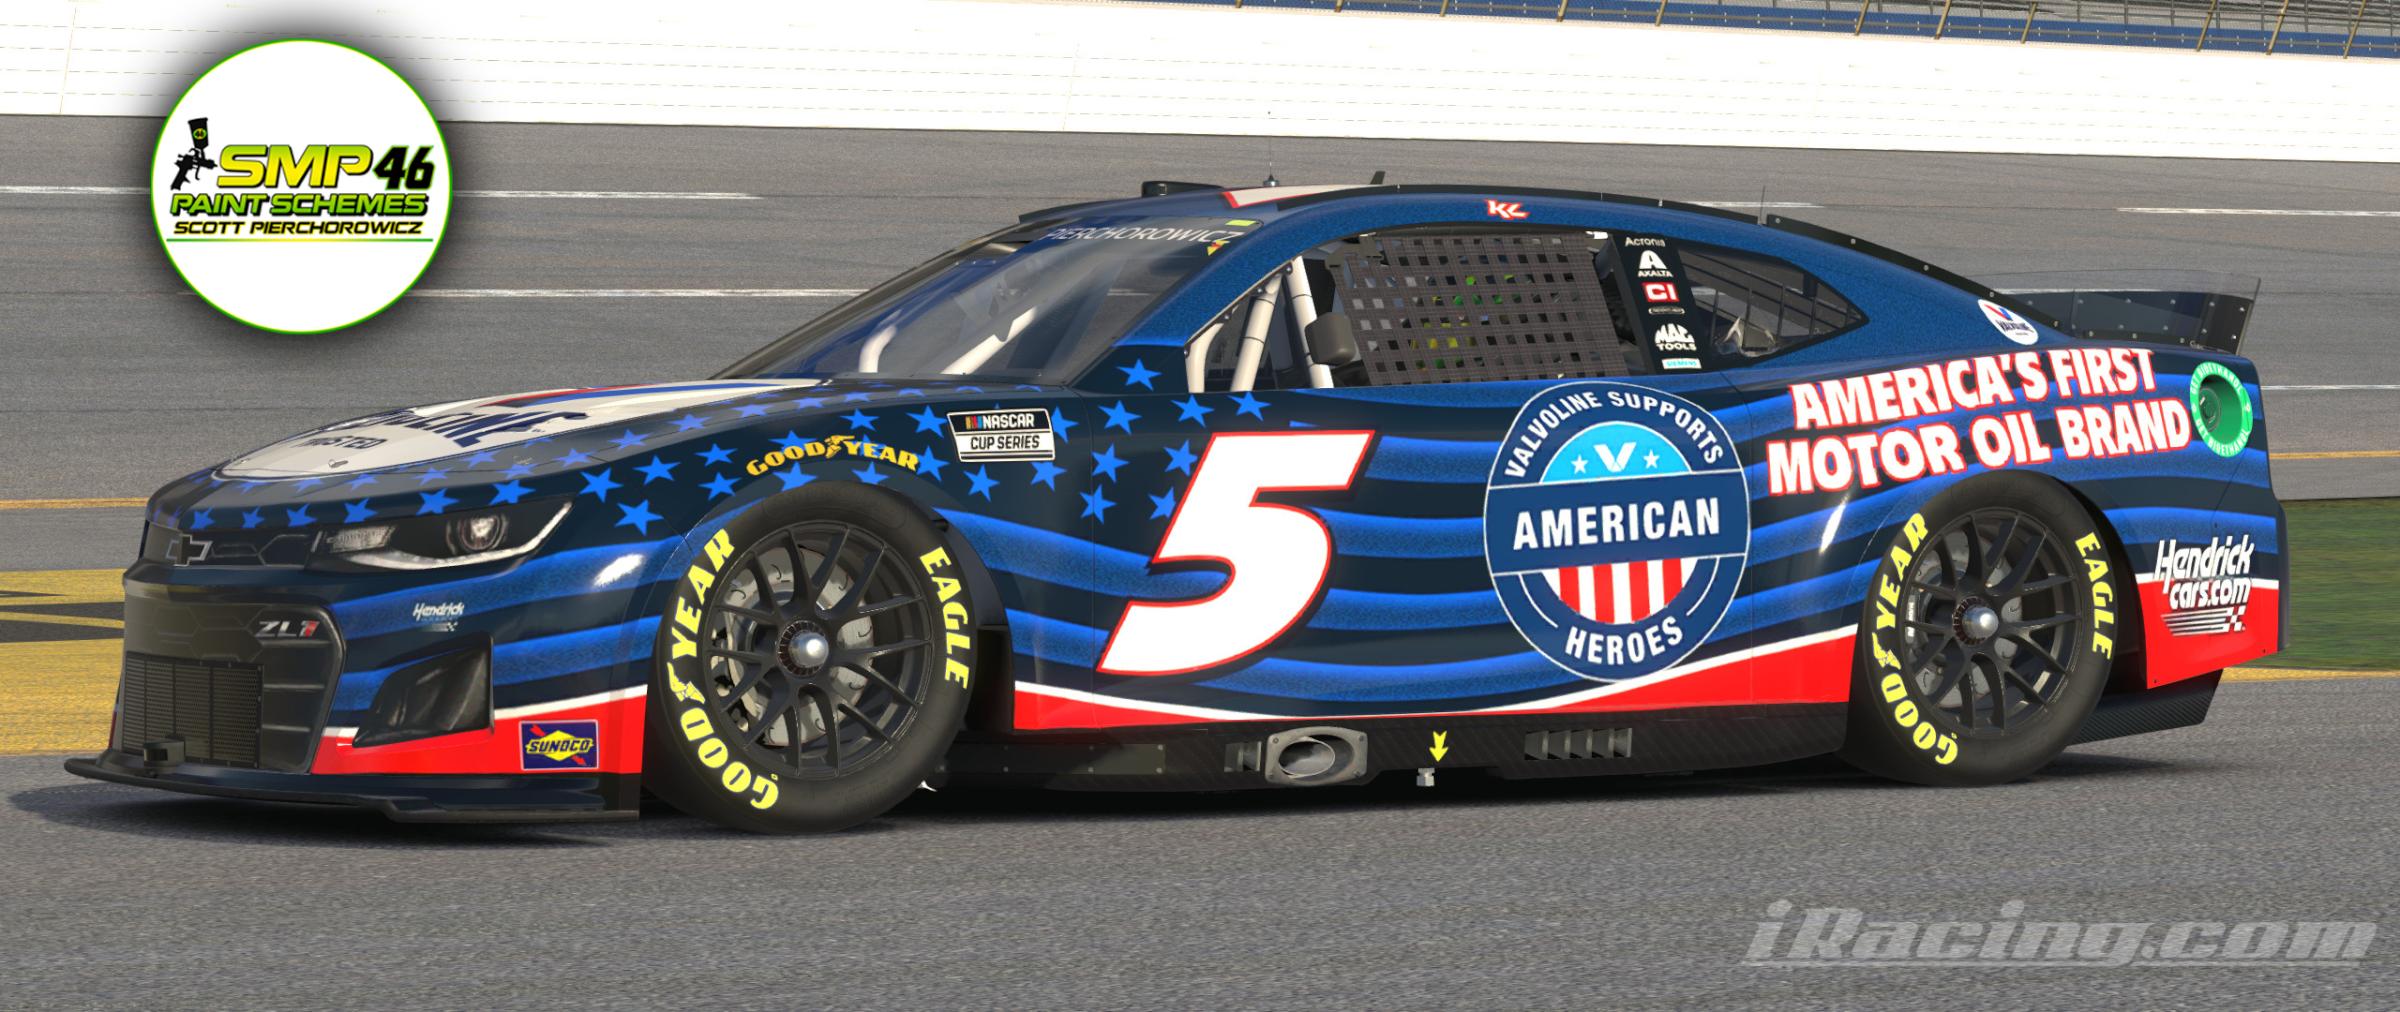 Preview of Kyle Larson Valvoline Supports American Heroes by Scott Pierchorowicz